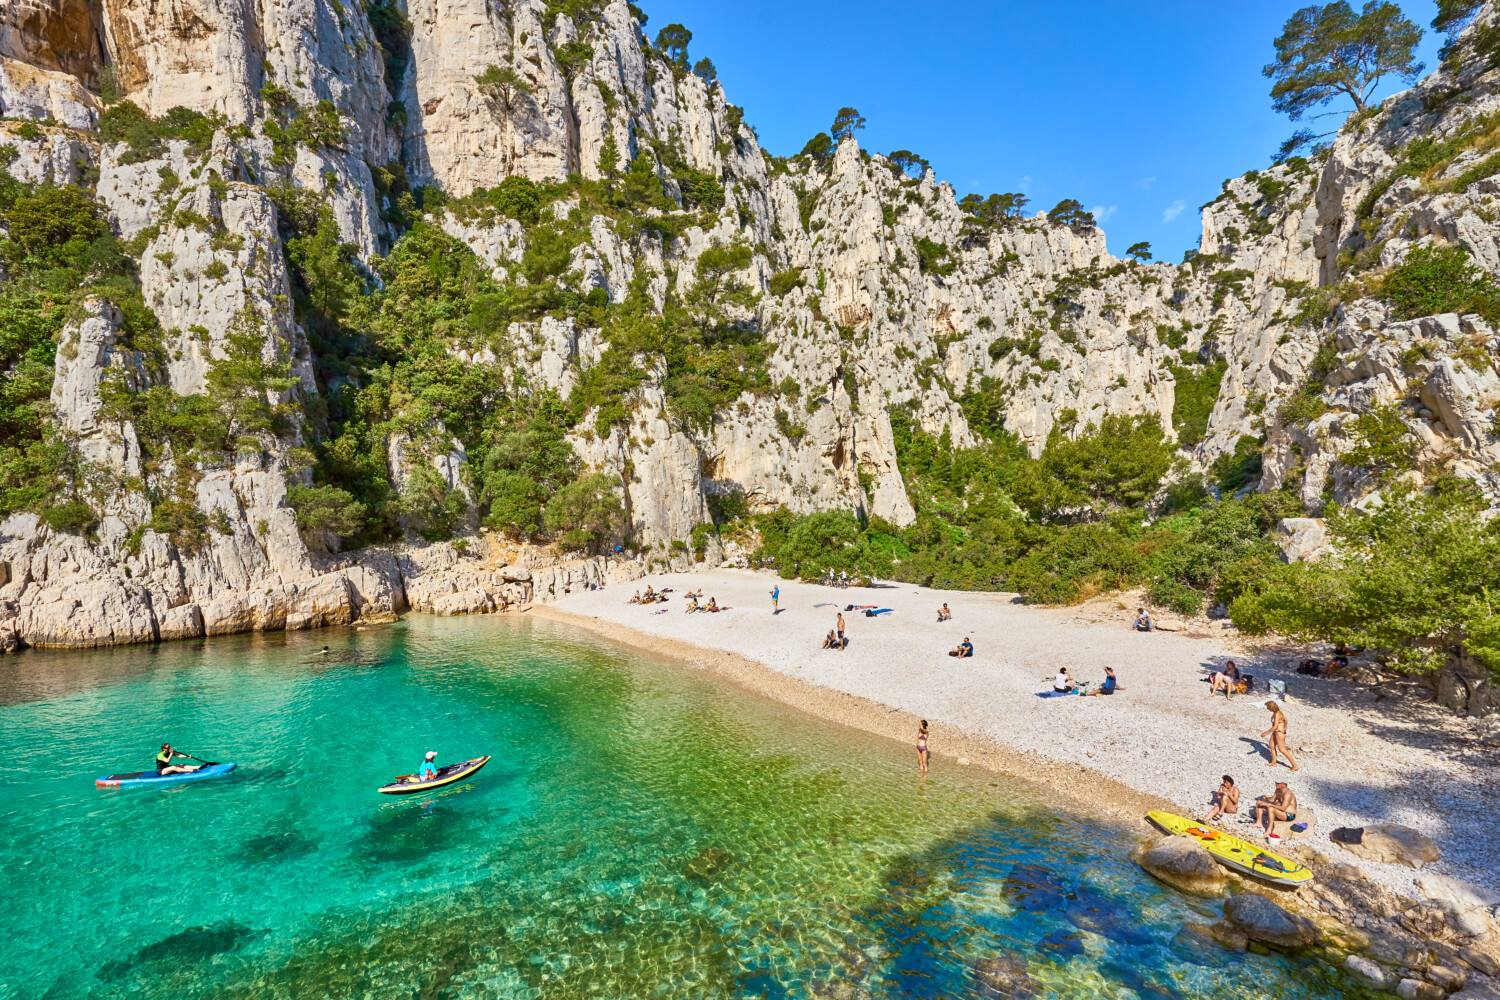 Beach and blue waters at Calanque d'en Vau in France